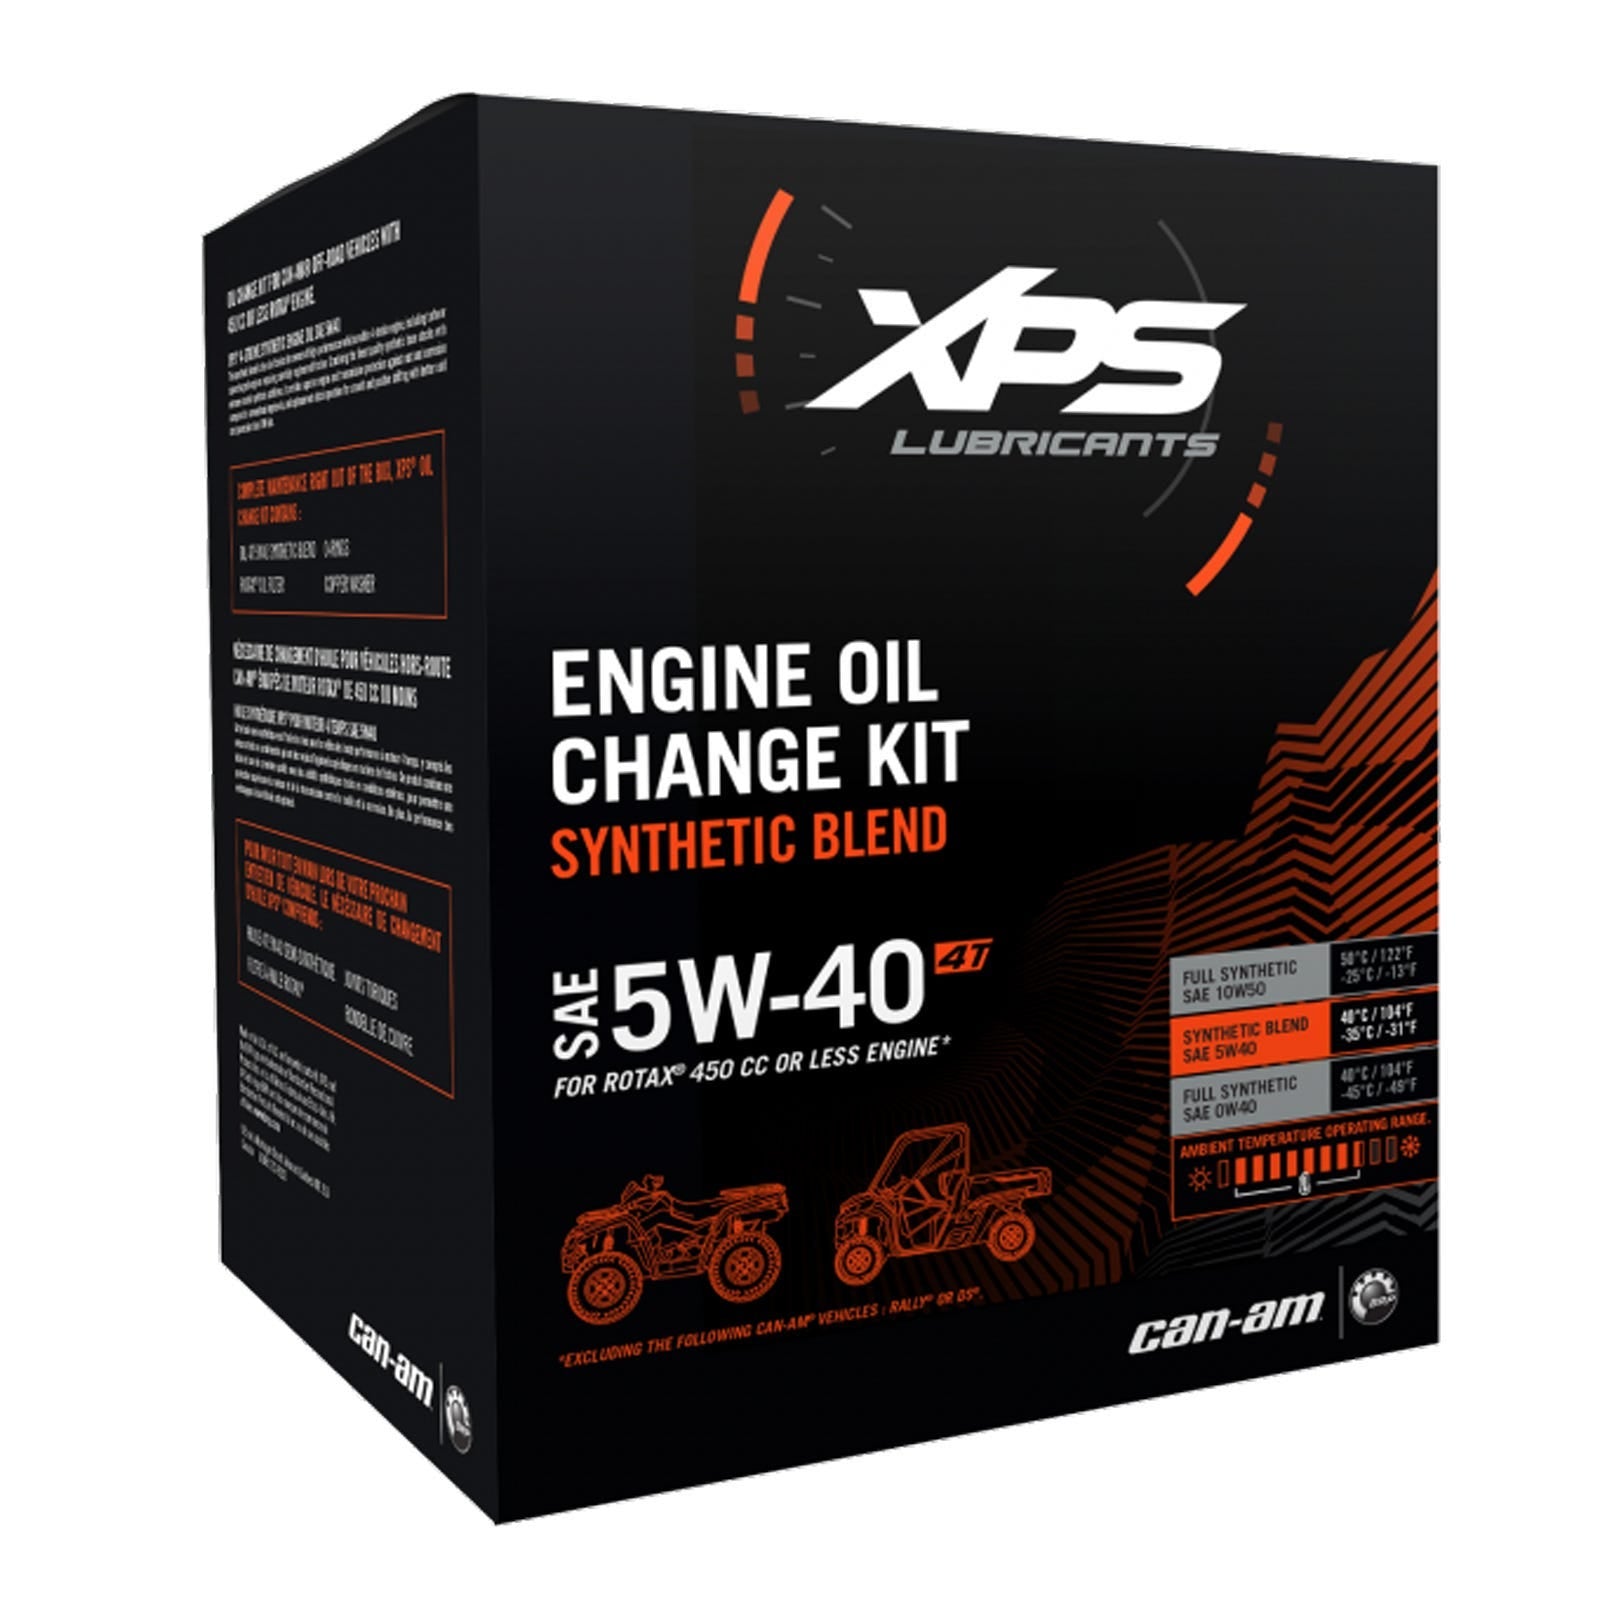 Can-am 4T 5W-40 Synthetic Blend Oil Change Kit for Rotax 450 cc or less engine 779256 - The Parts Lodge